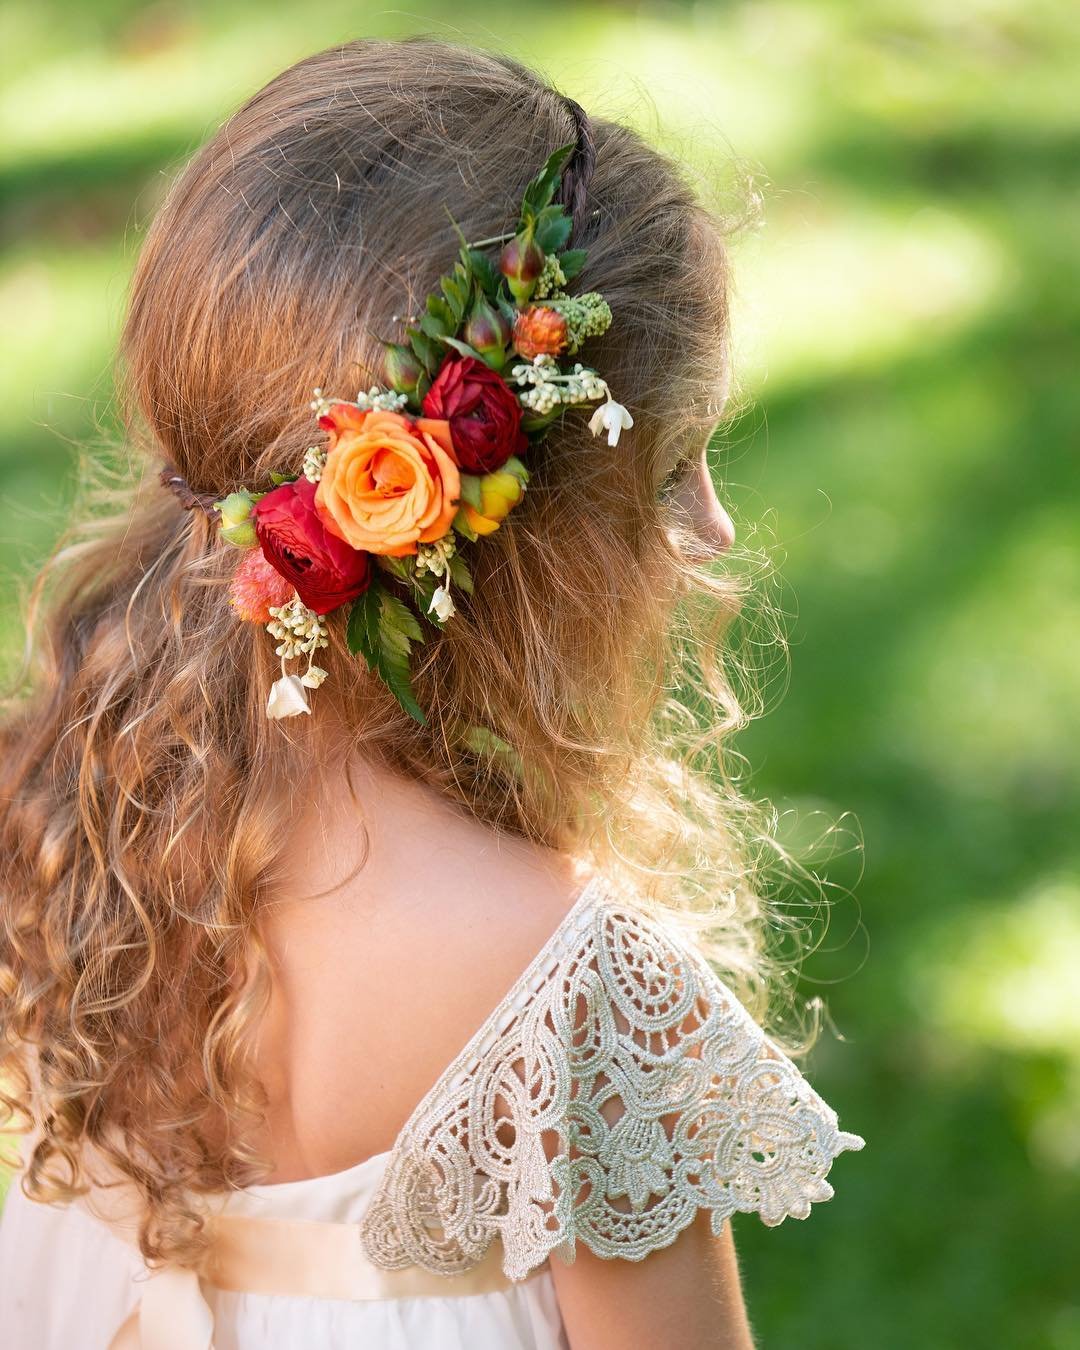 Floral Headpiece from Fox Hill Farm in Honesdale PA.jpg